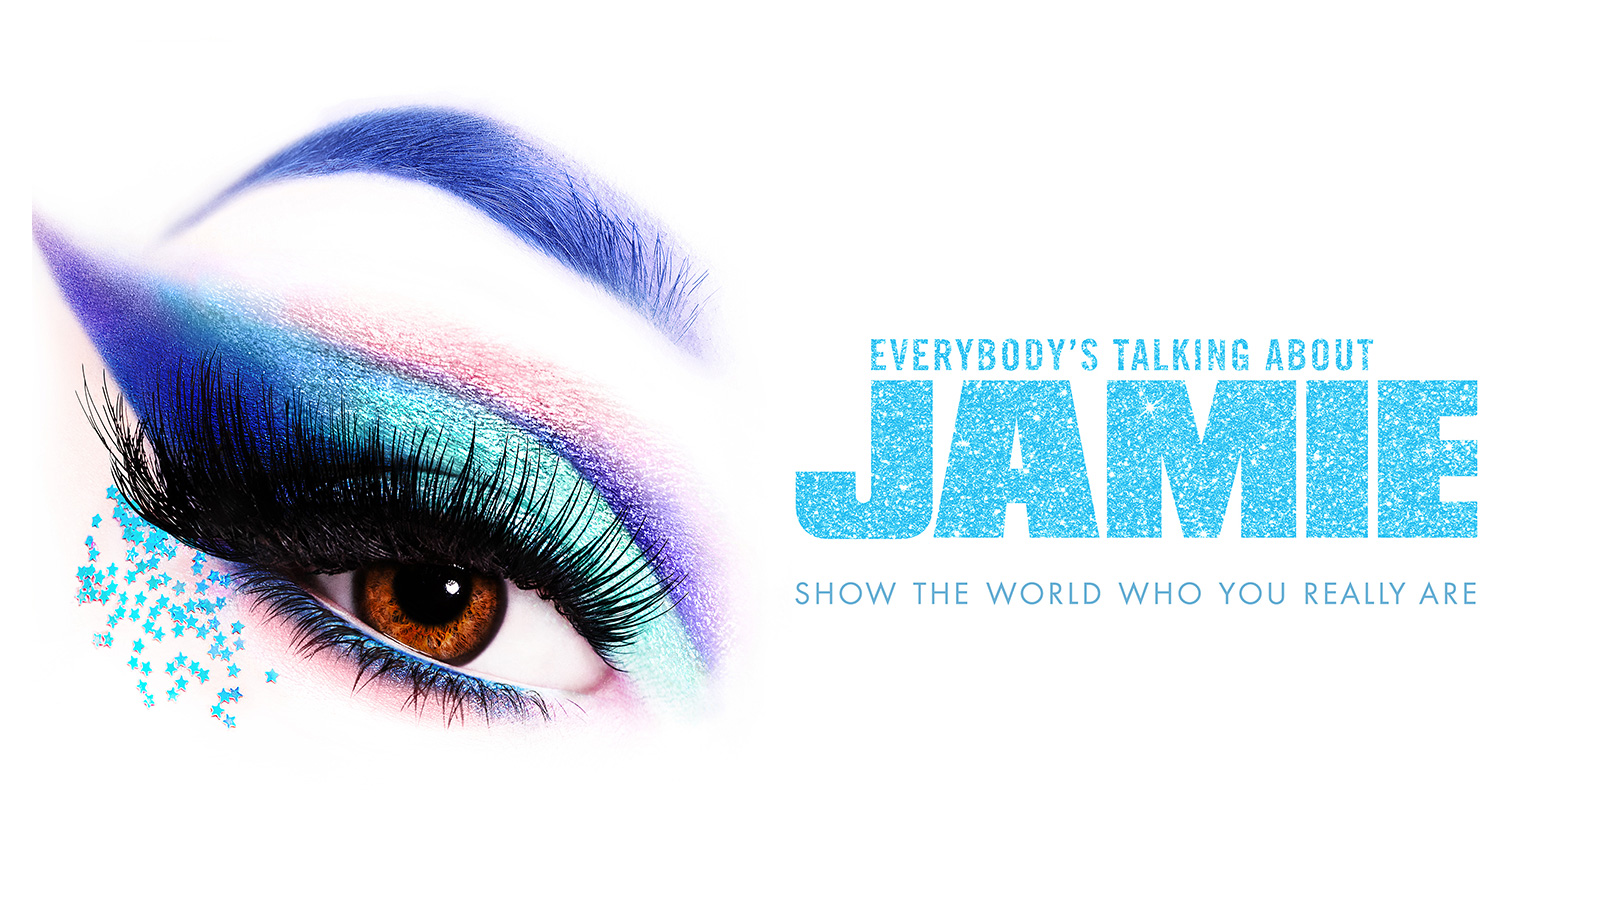 New trailer, poster reveal peek at EVERYBODY'S TALKING ABOUT JAMIE